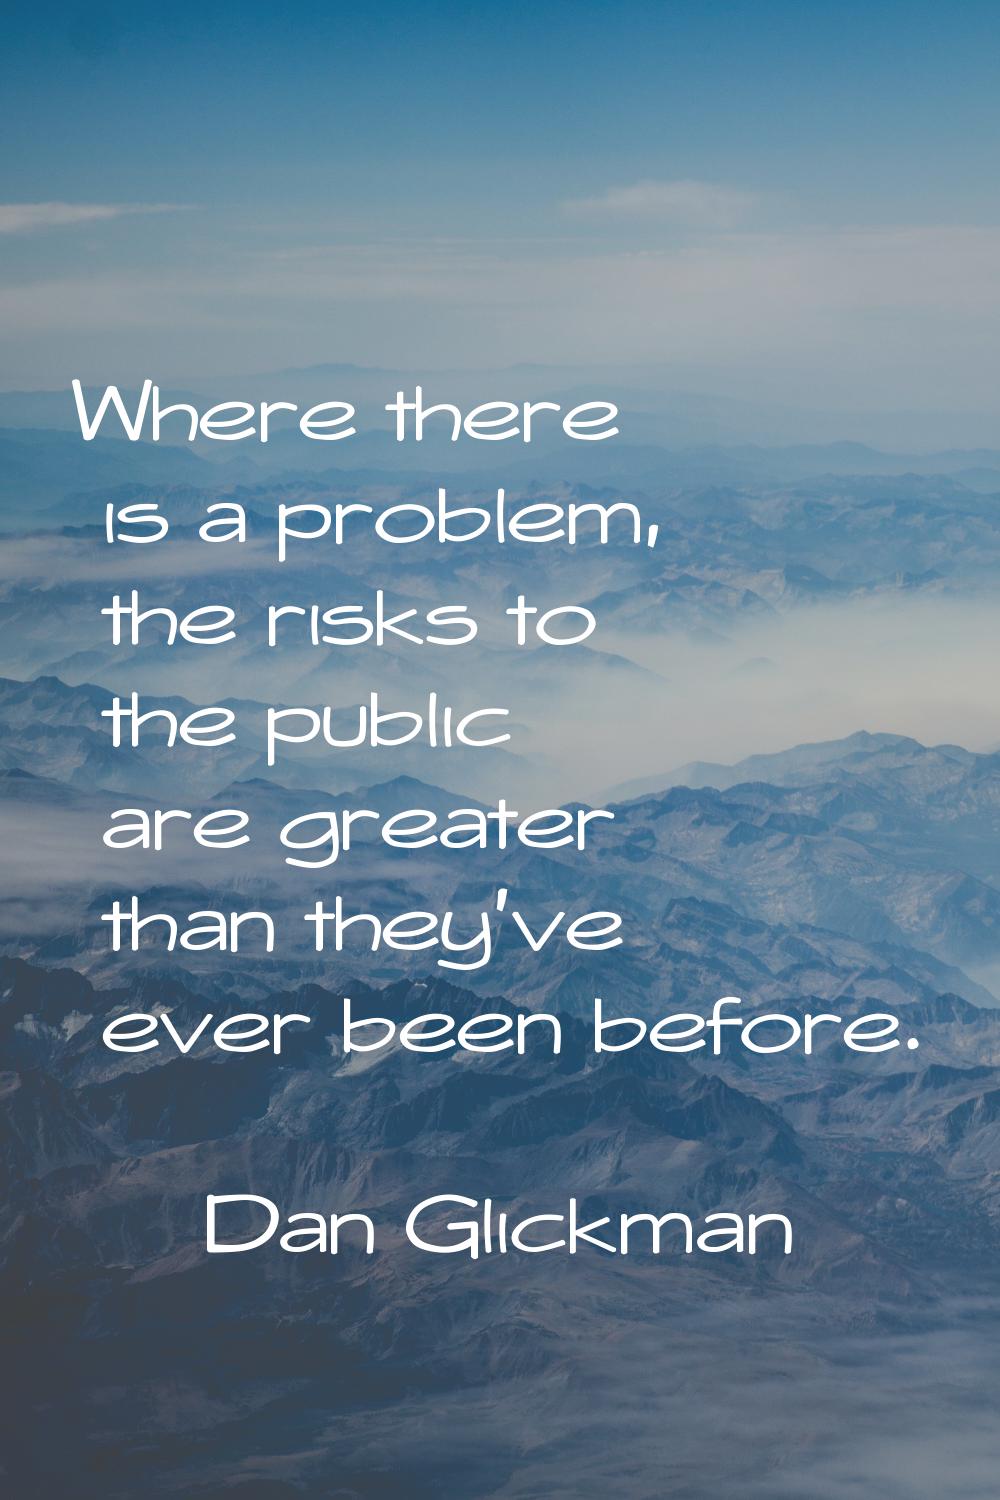 Where there is a problem, the risks to the public are greater than they've ever been before.